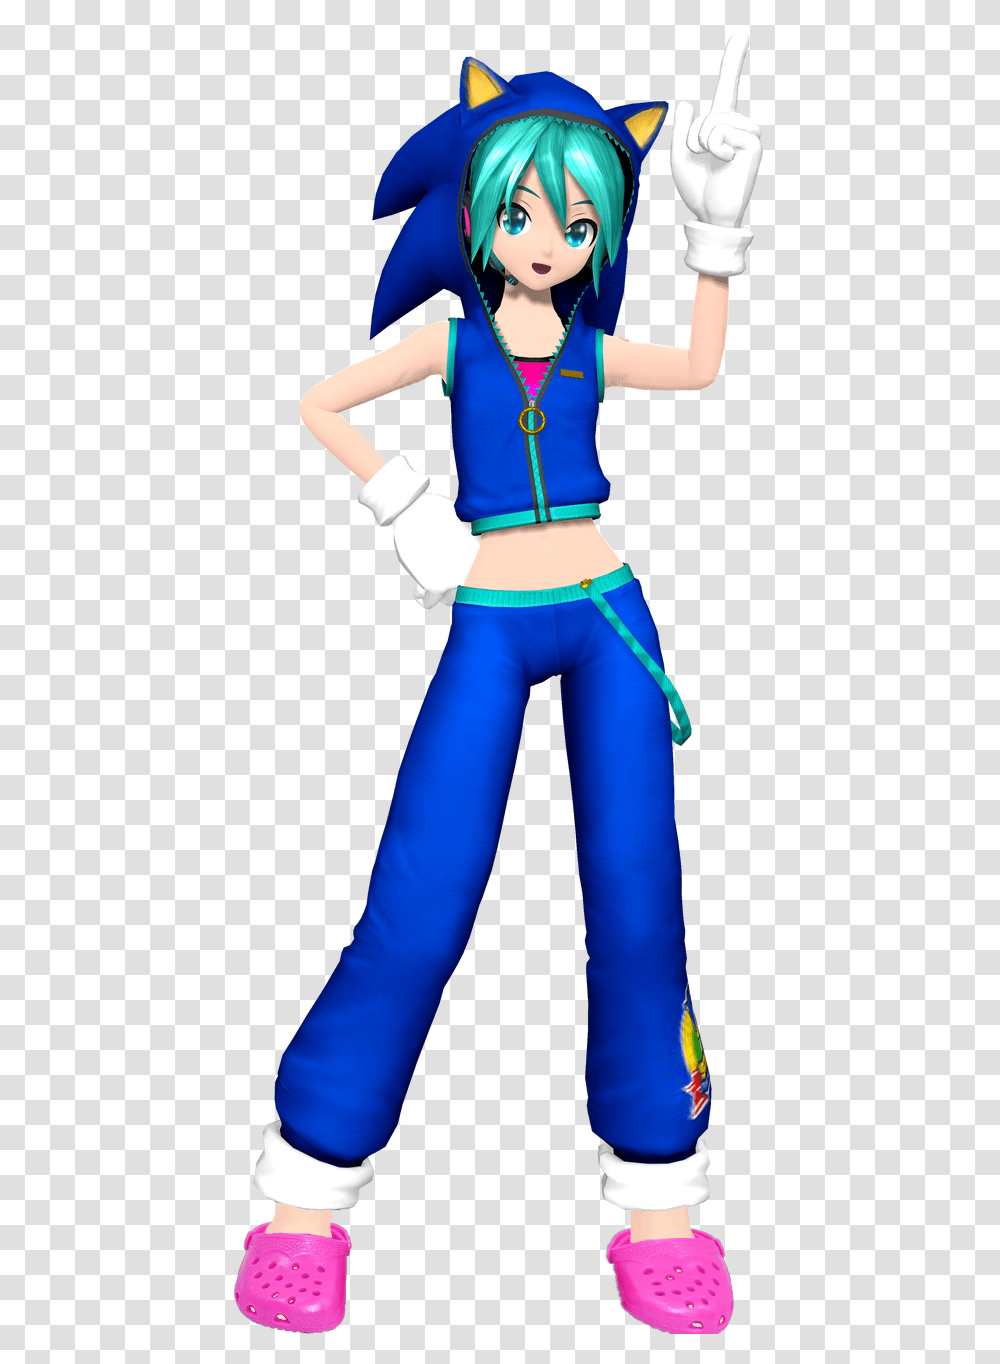 Hatsune Miku Shouldnt Be Wearing Pink Crocs With Her Project Diva Miku Sonic, Costume, Person, Performer Transparent Png